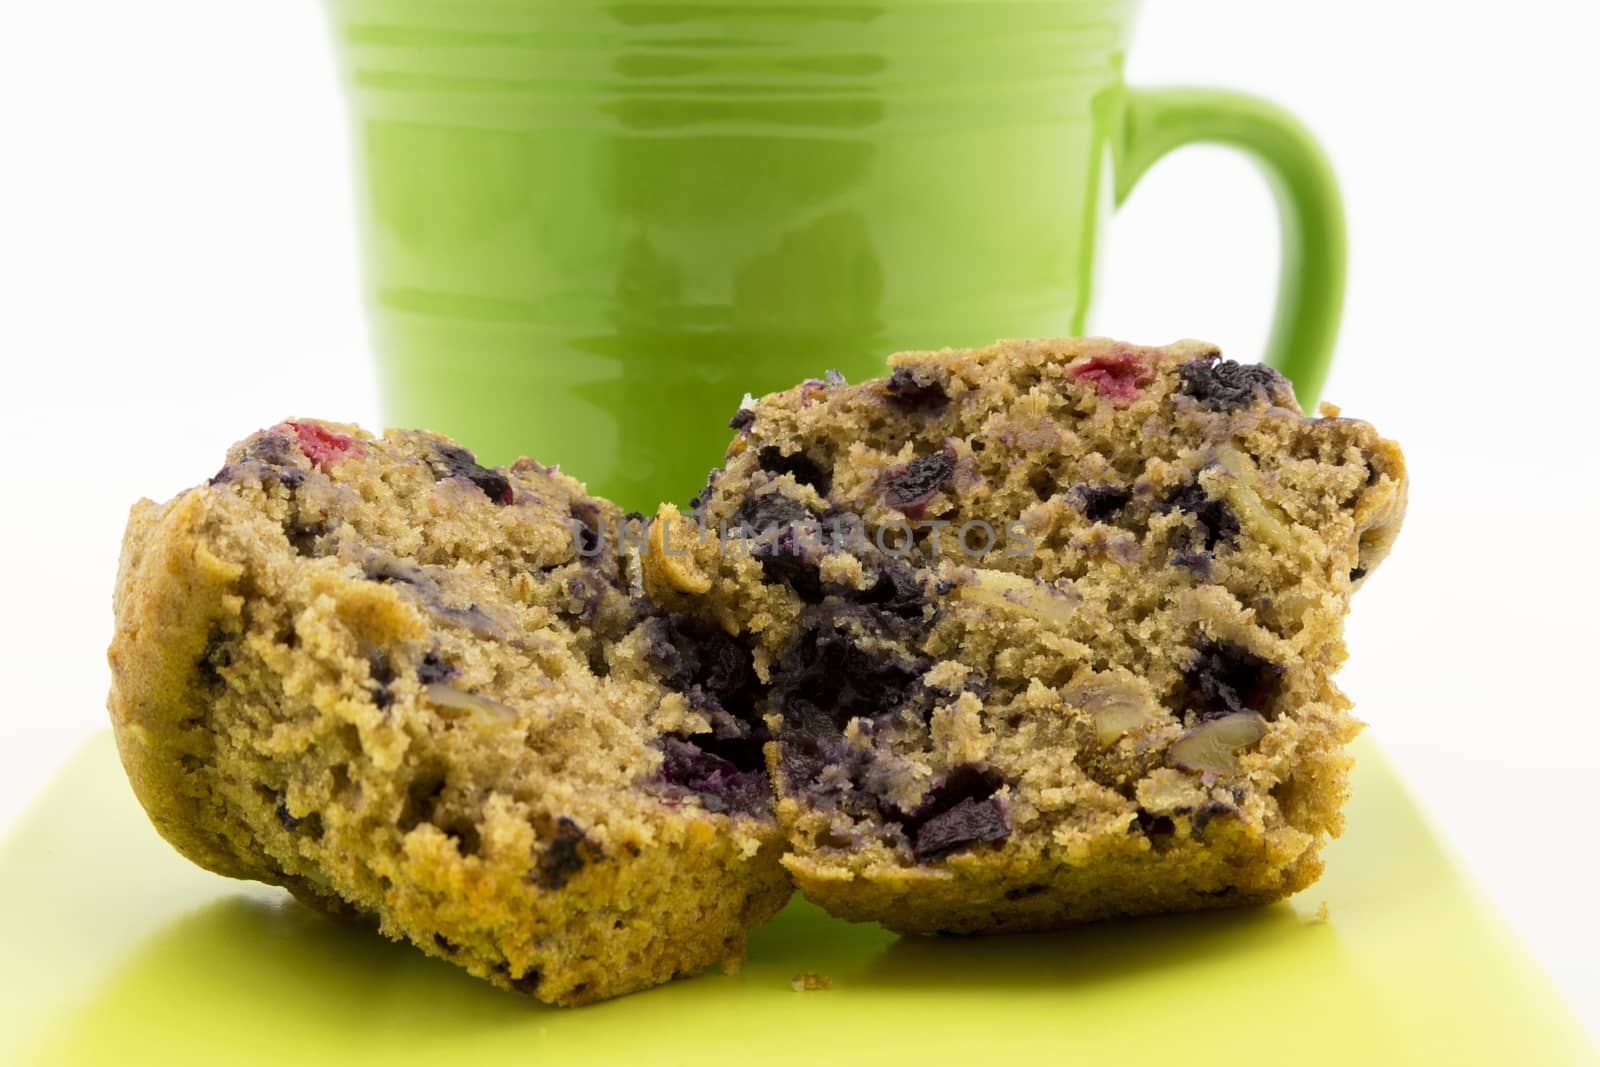 Fruit and nut muffin with green mug by fmcginn